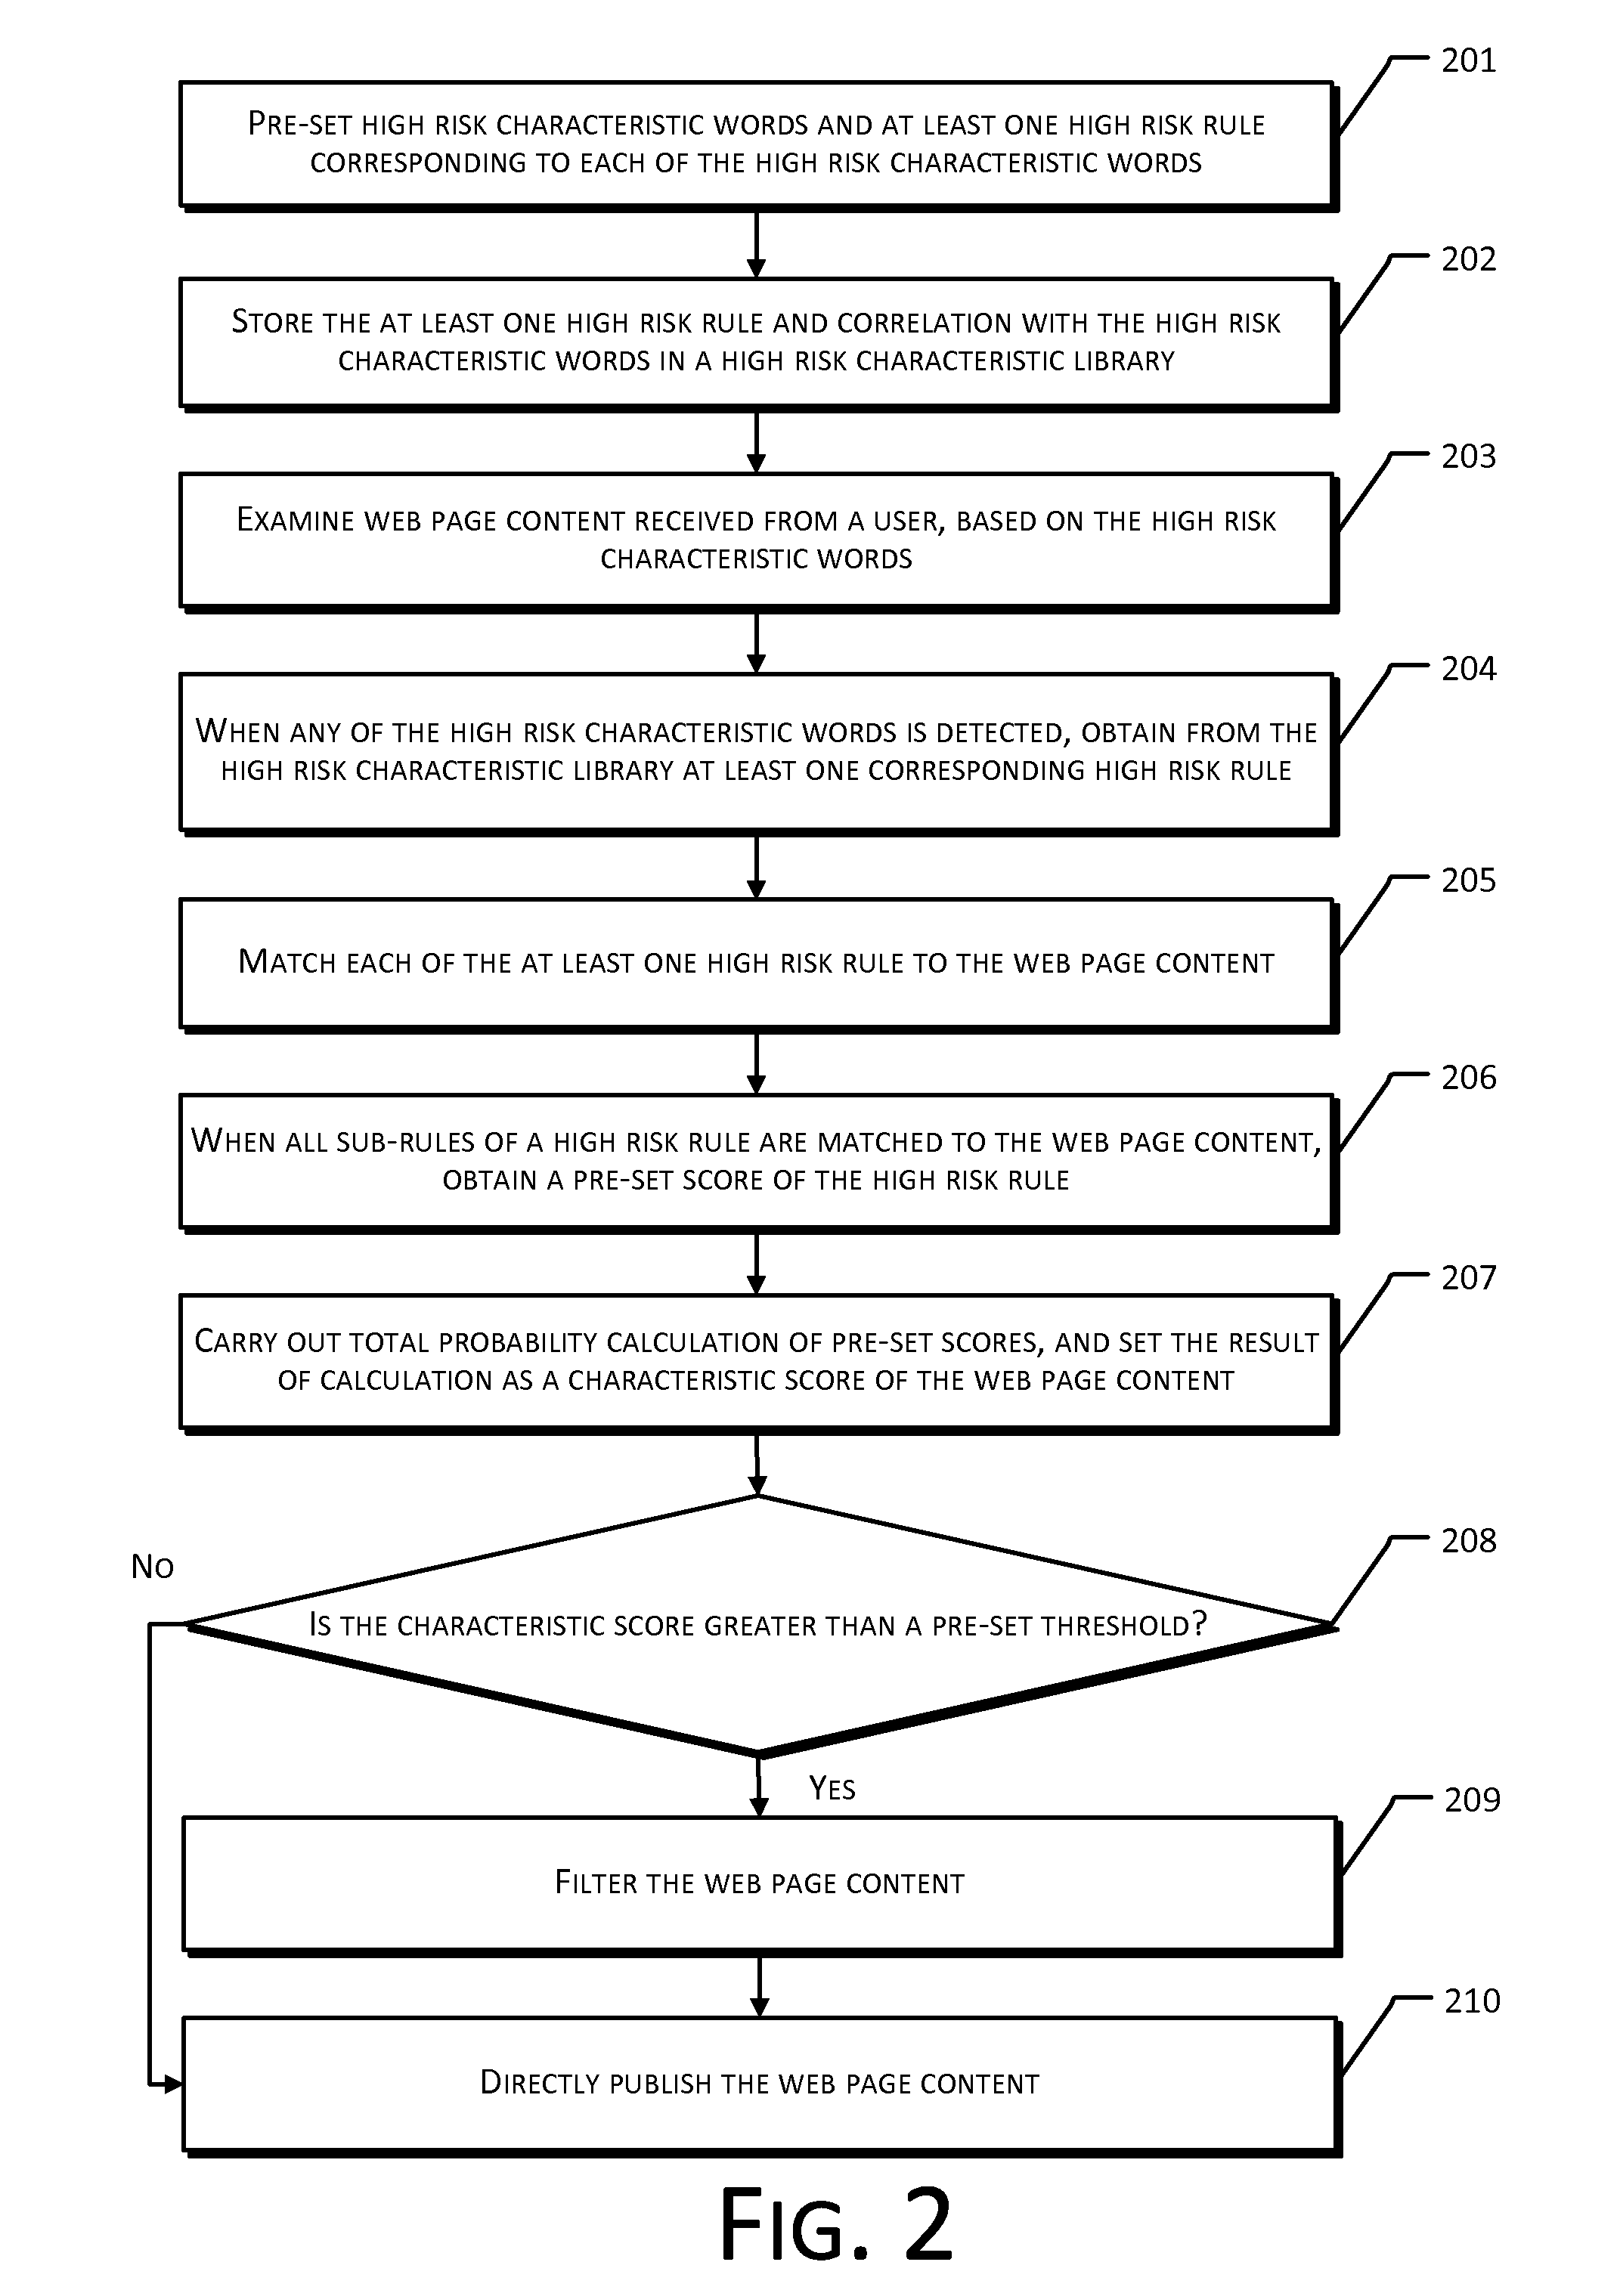 Method and System of Web Page Content Filtering